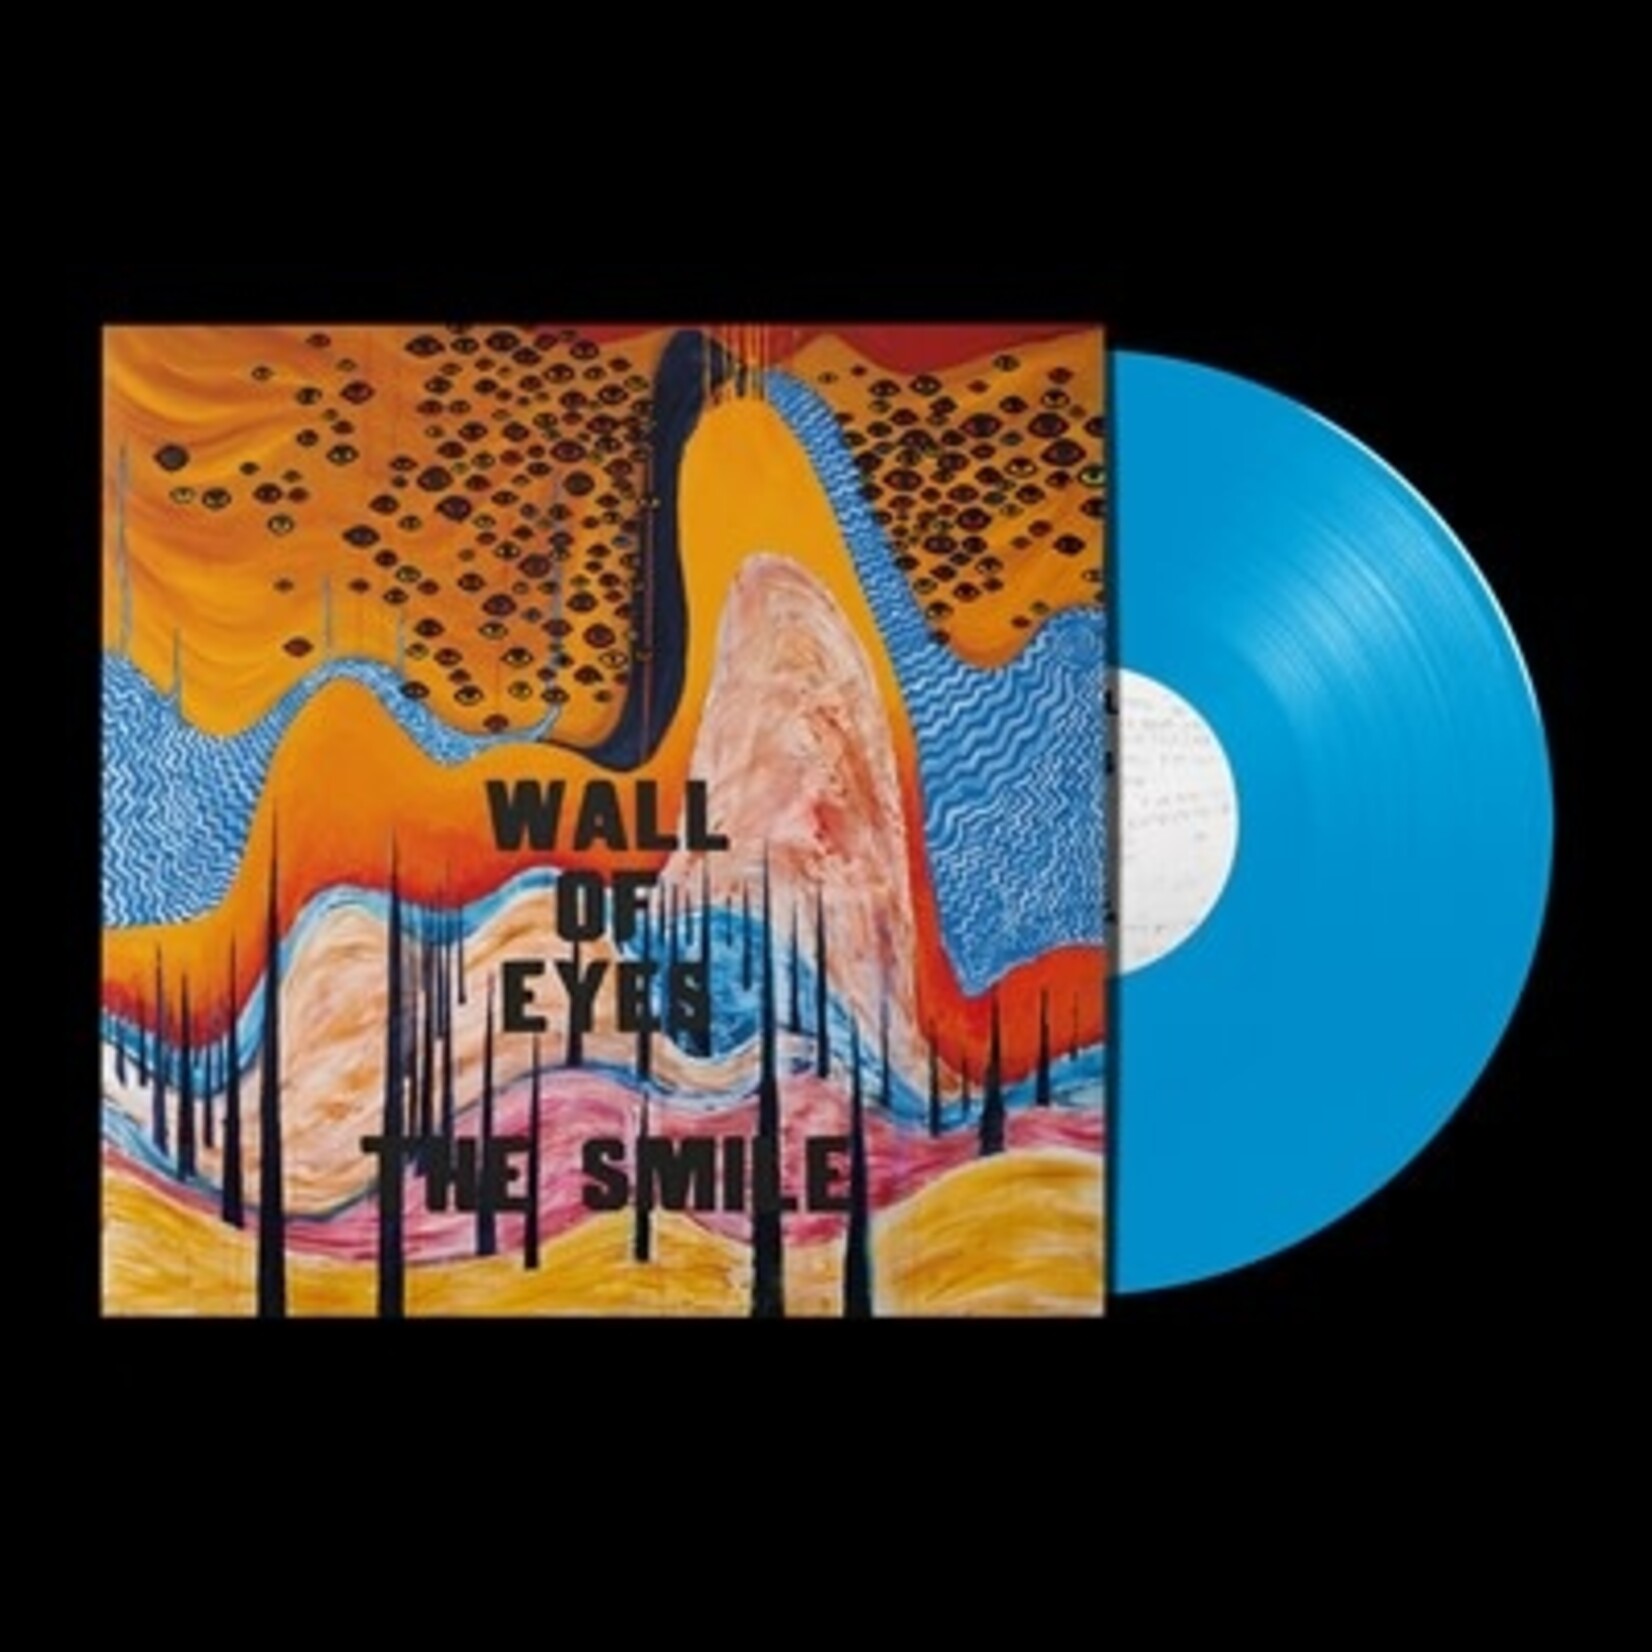 XL Recordings Smile - Wall of Eyes (LP) [Blue]